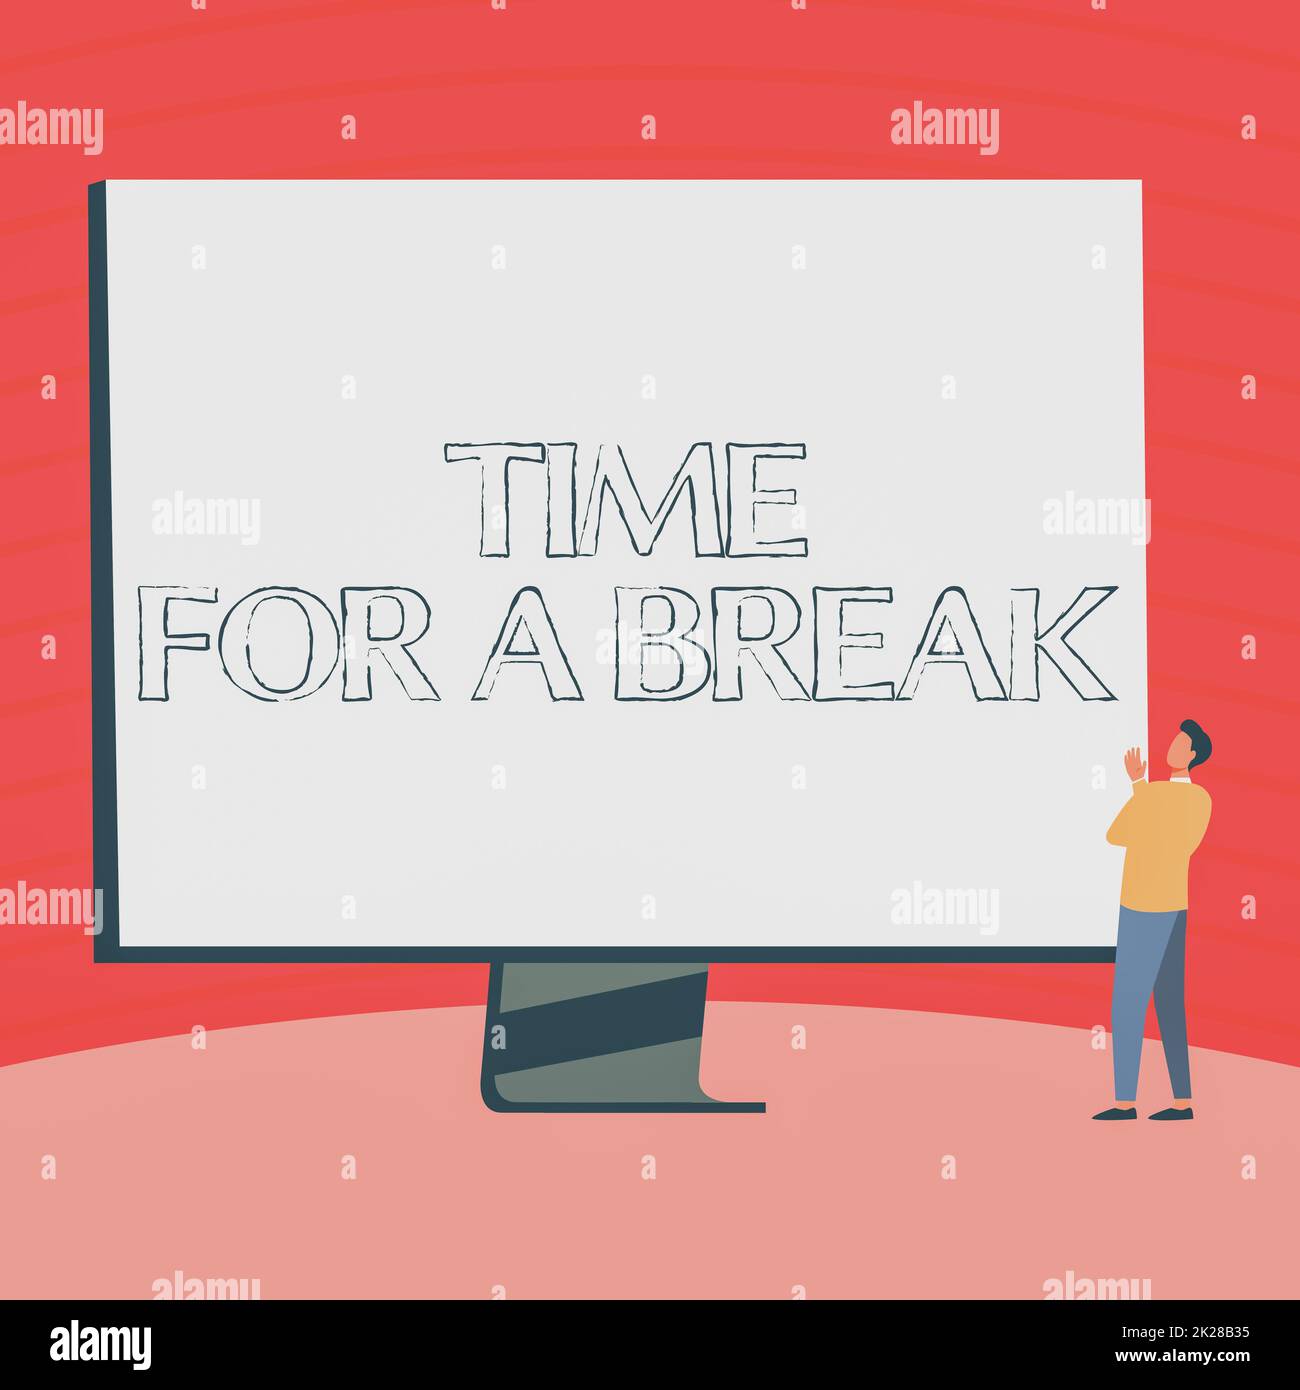 Writing displaying text Time For A Break. Business concept Making a pause from work or any other activity relax Man Standing Drawing Looking At Large Monitor Display Showing News. Stock Photo